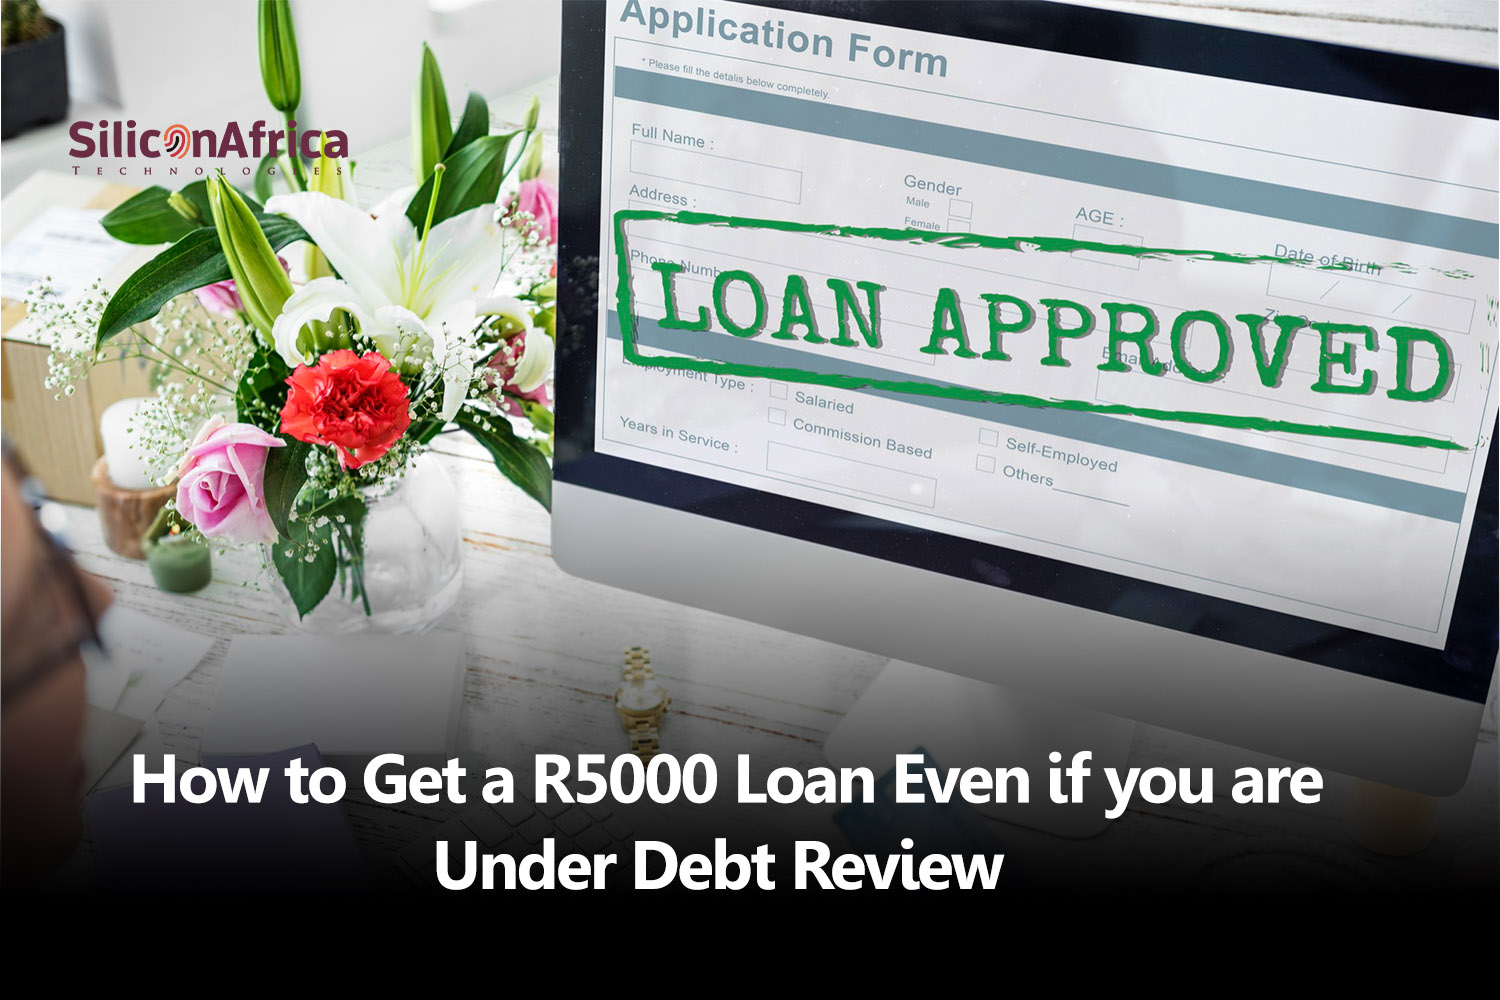 How to Get a R5000 Loan Even if You Are Under Debt Review